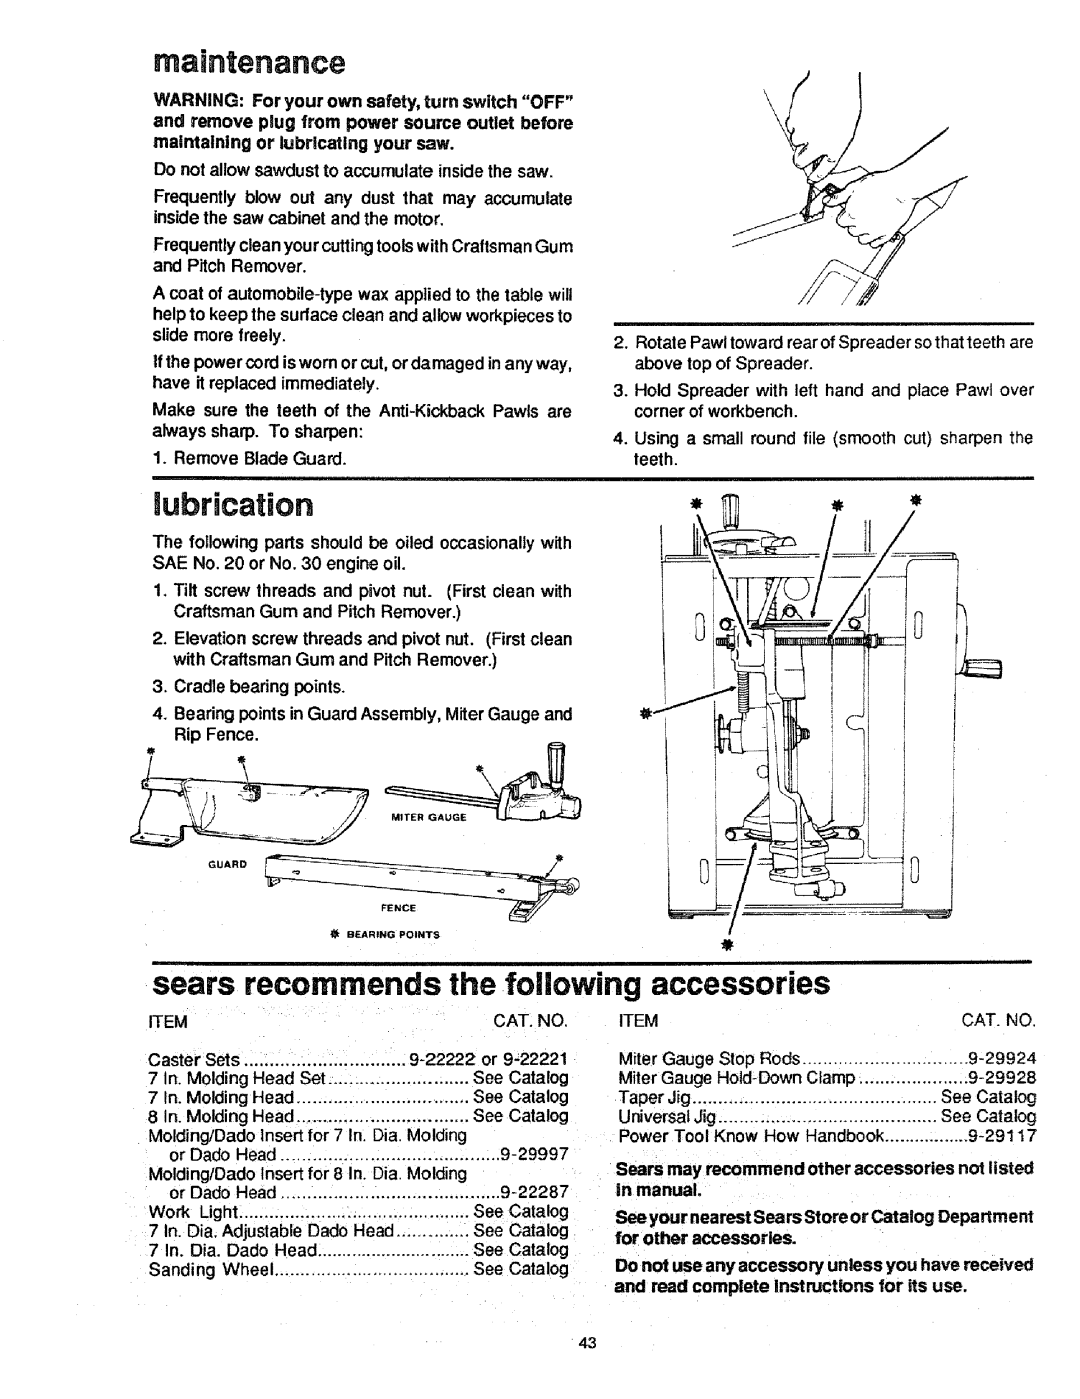 Craftsman 113.298721, 113.298761 manual maintenance, mubrication, sears recommends the following accessories 